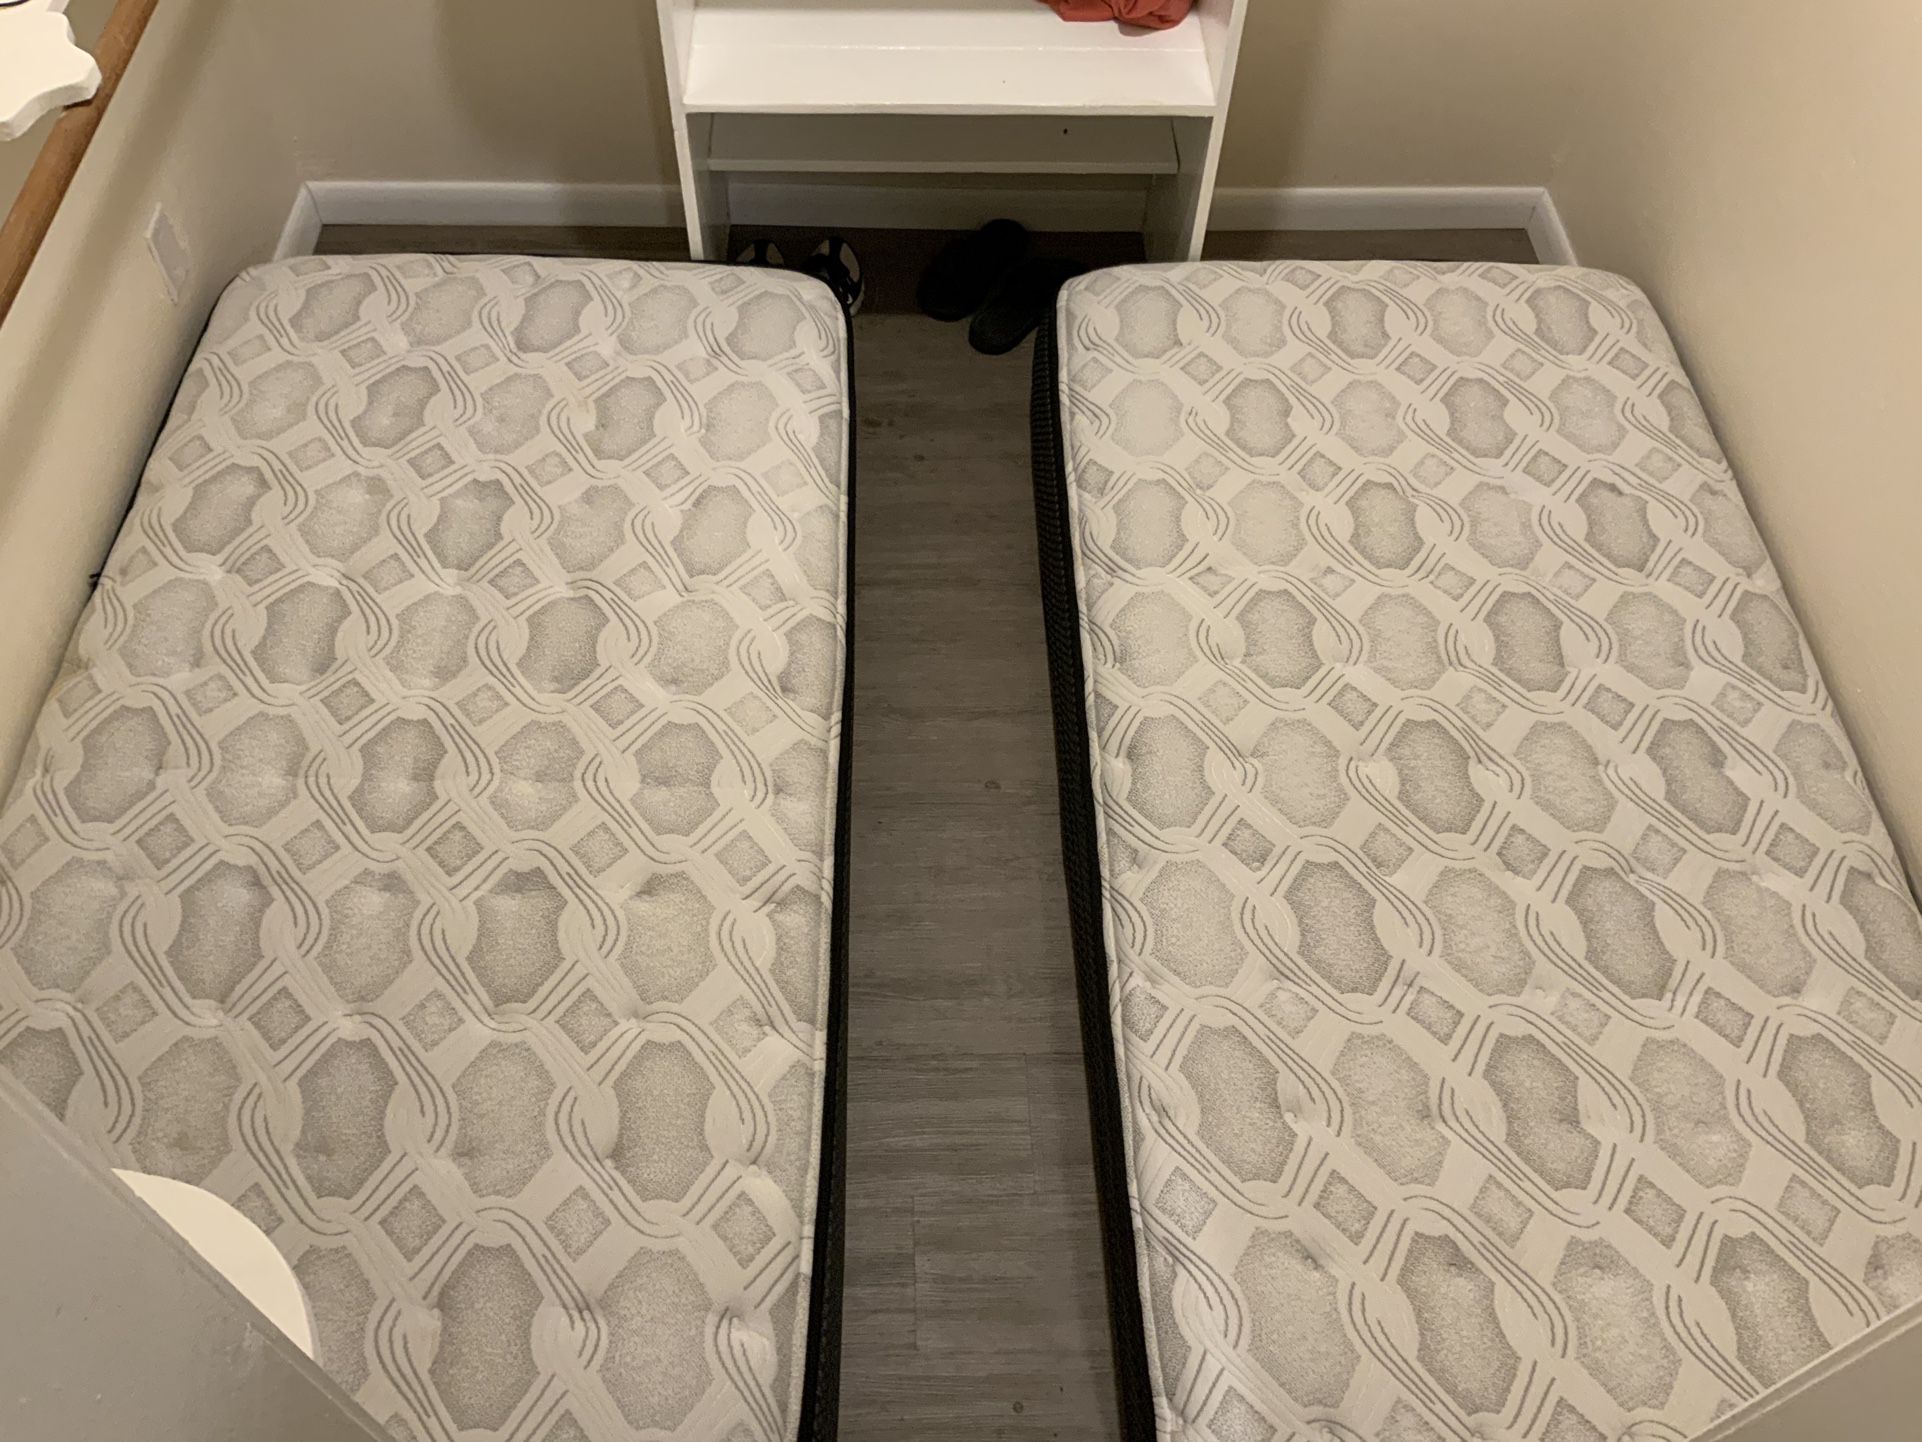 two twin size mattresses 10 inches thick - bed - mattress - bedroom -NOT Free- Read Ad Please